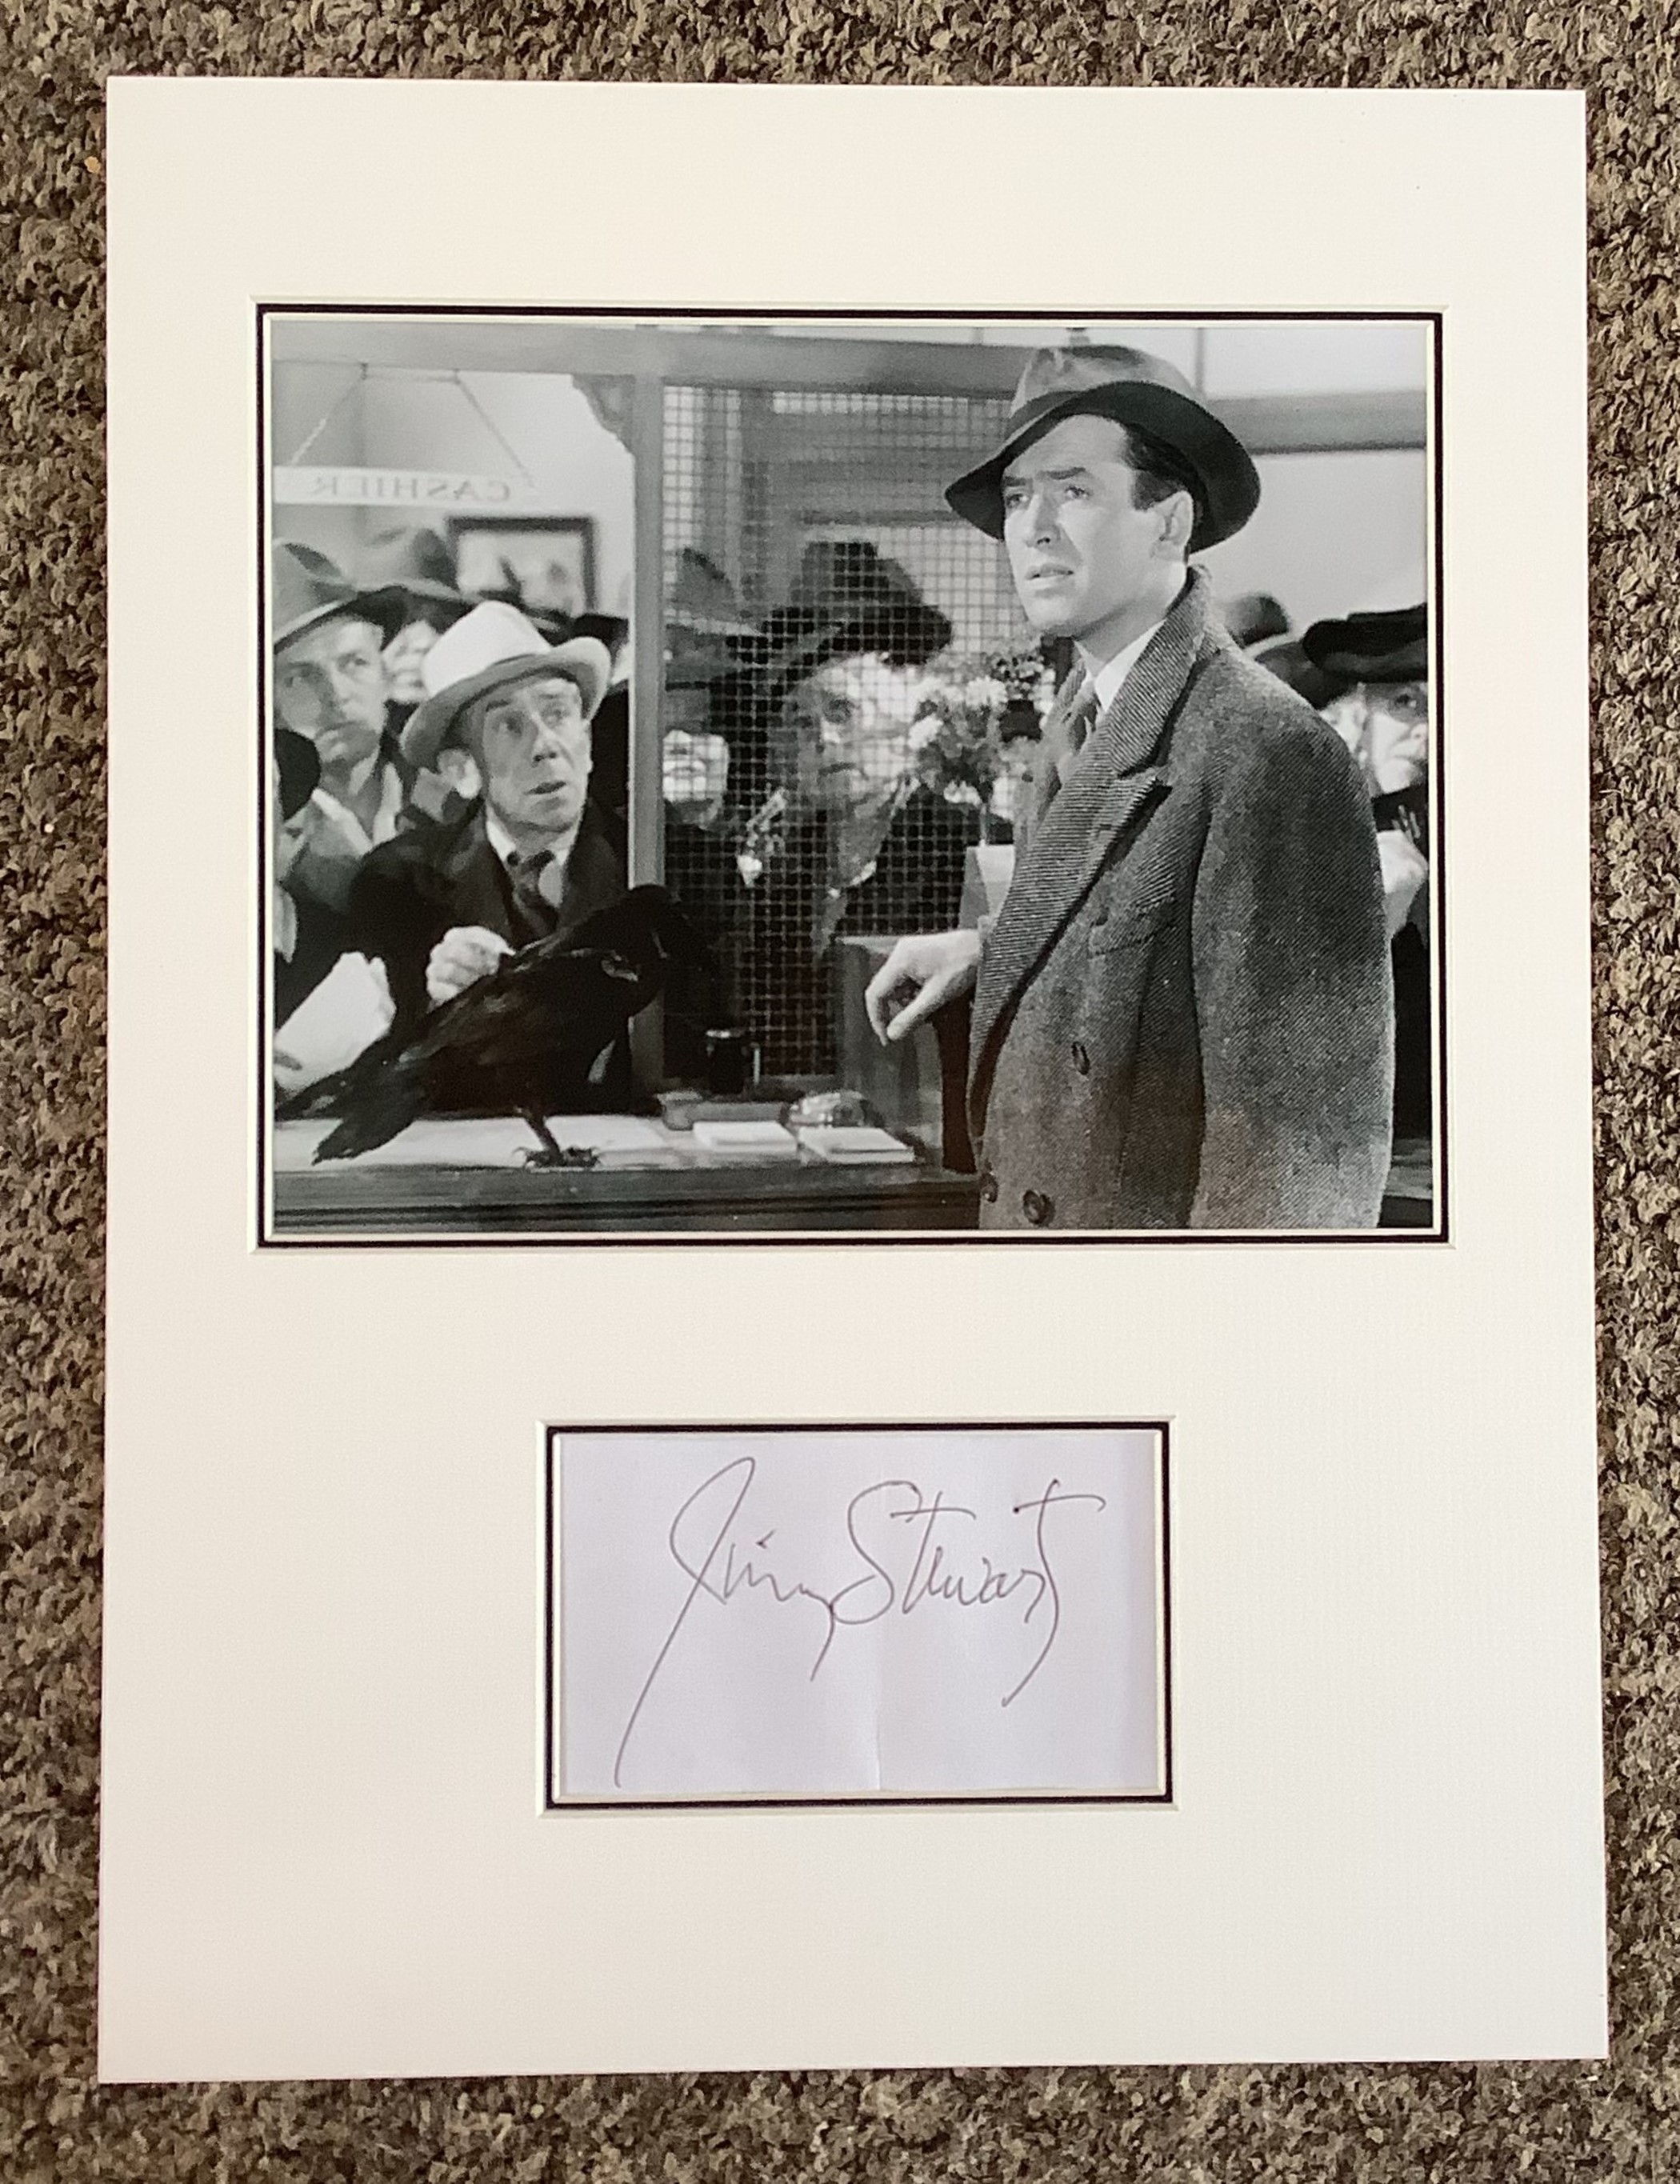 James Stewart 15x11 approx mounted signature piece includes signed album page and a black and